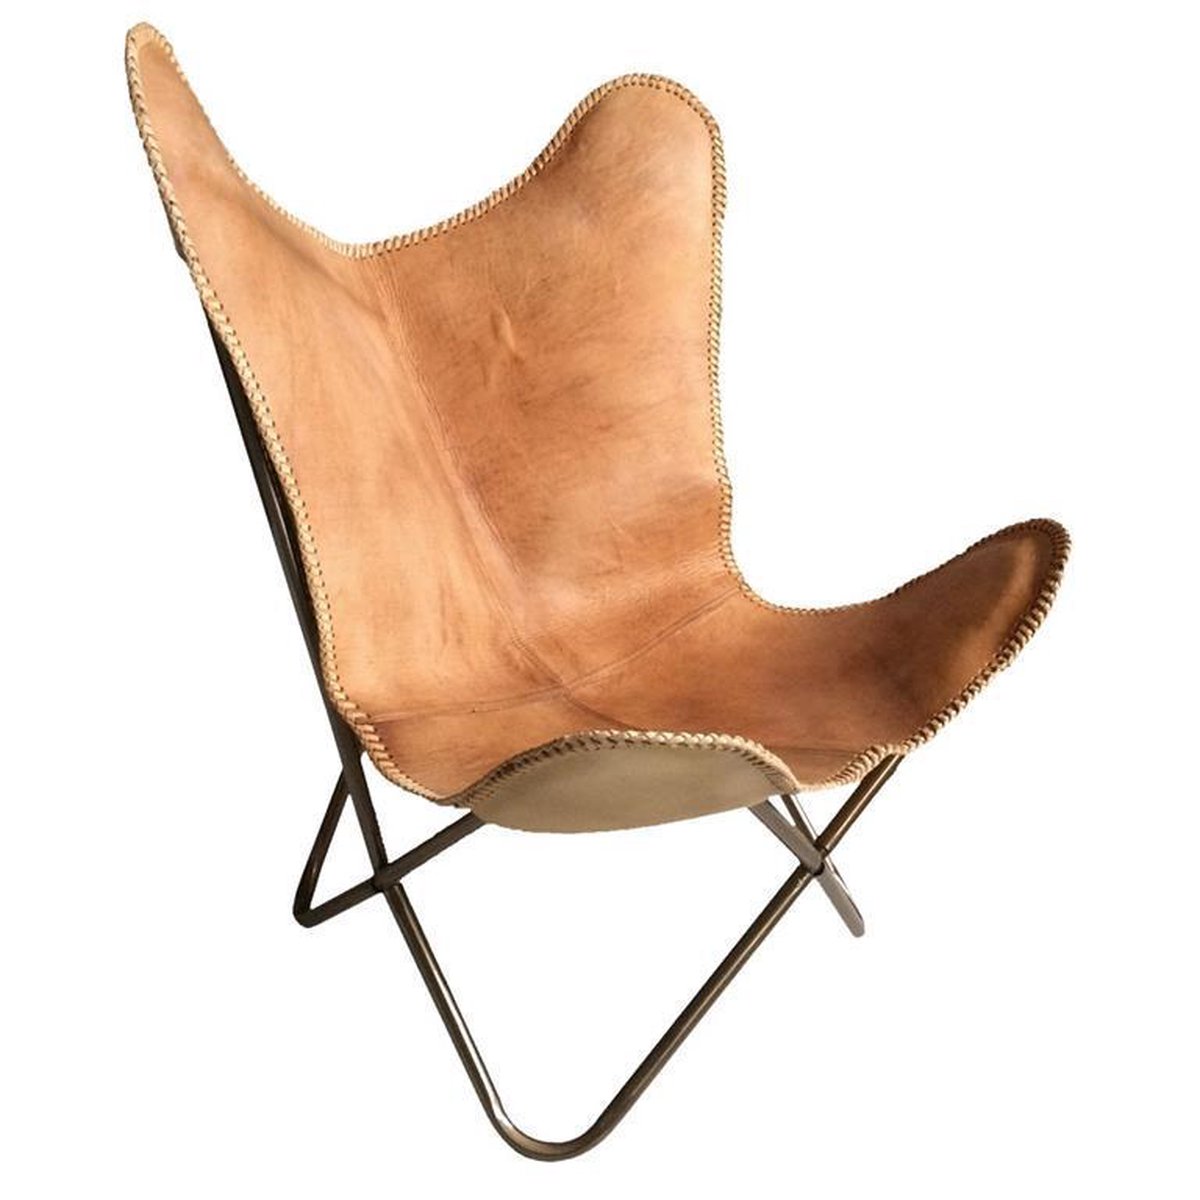 Malagoon - Leather butterfly chair natural brown | bol.com